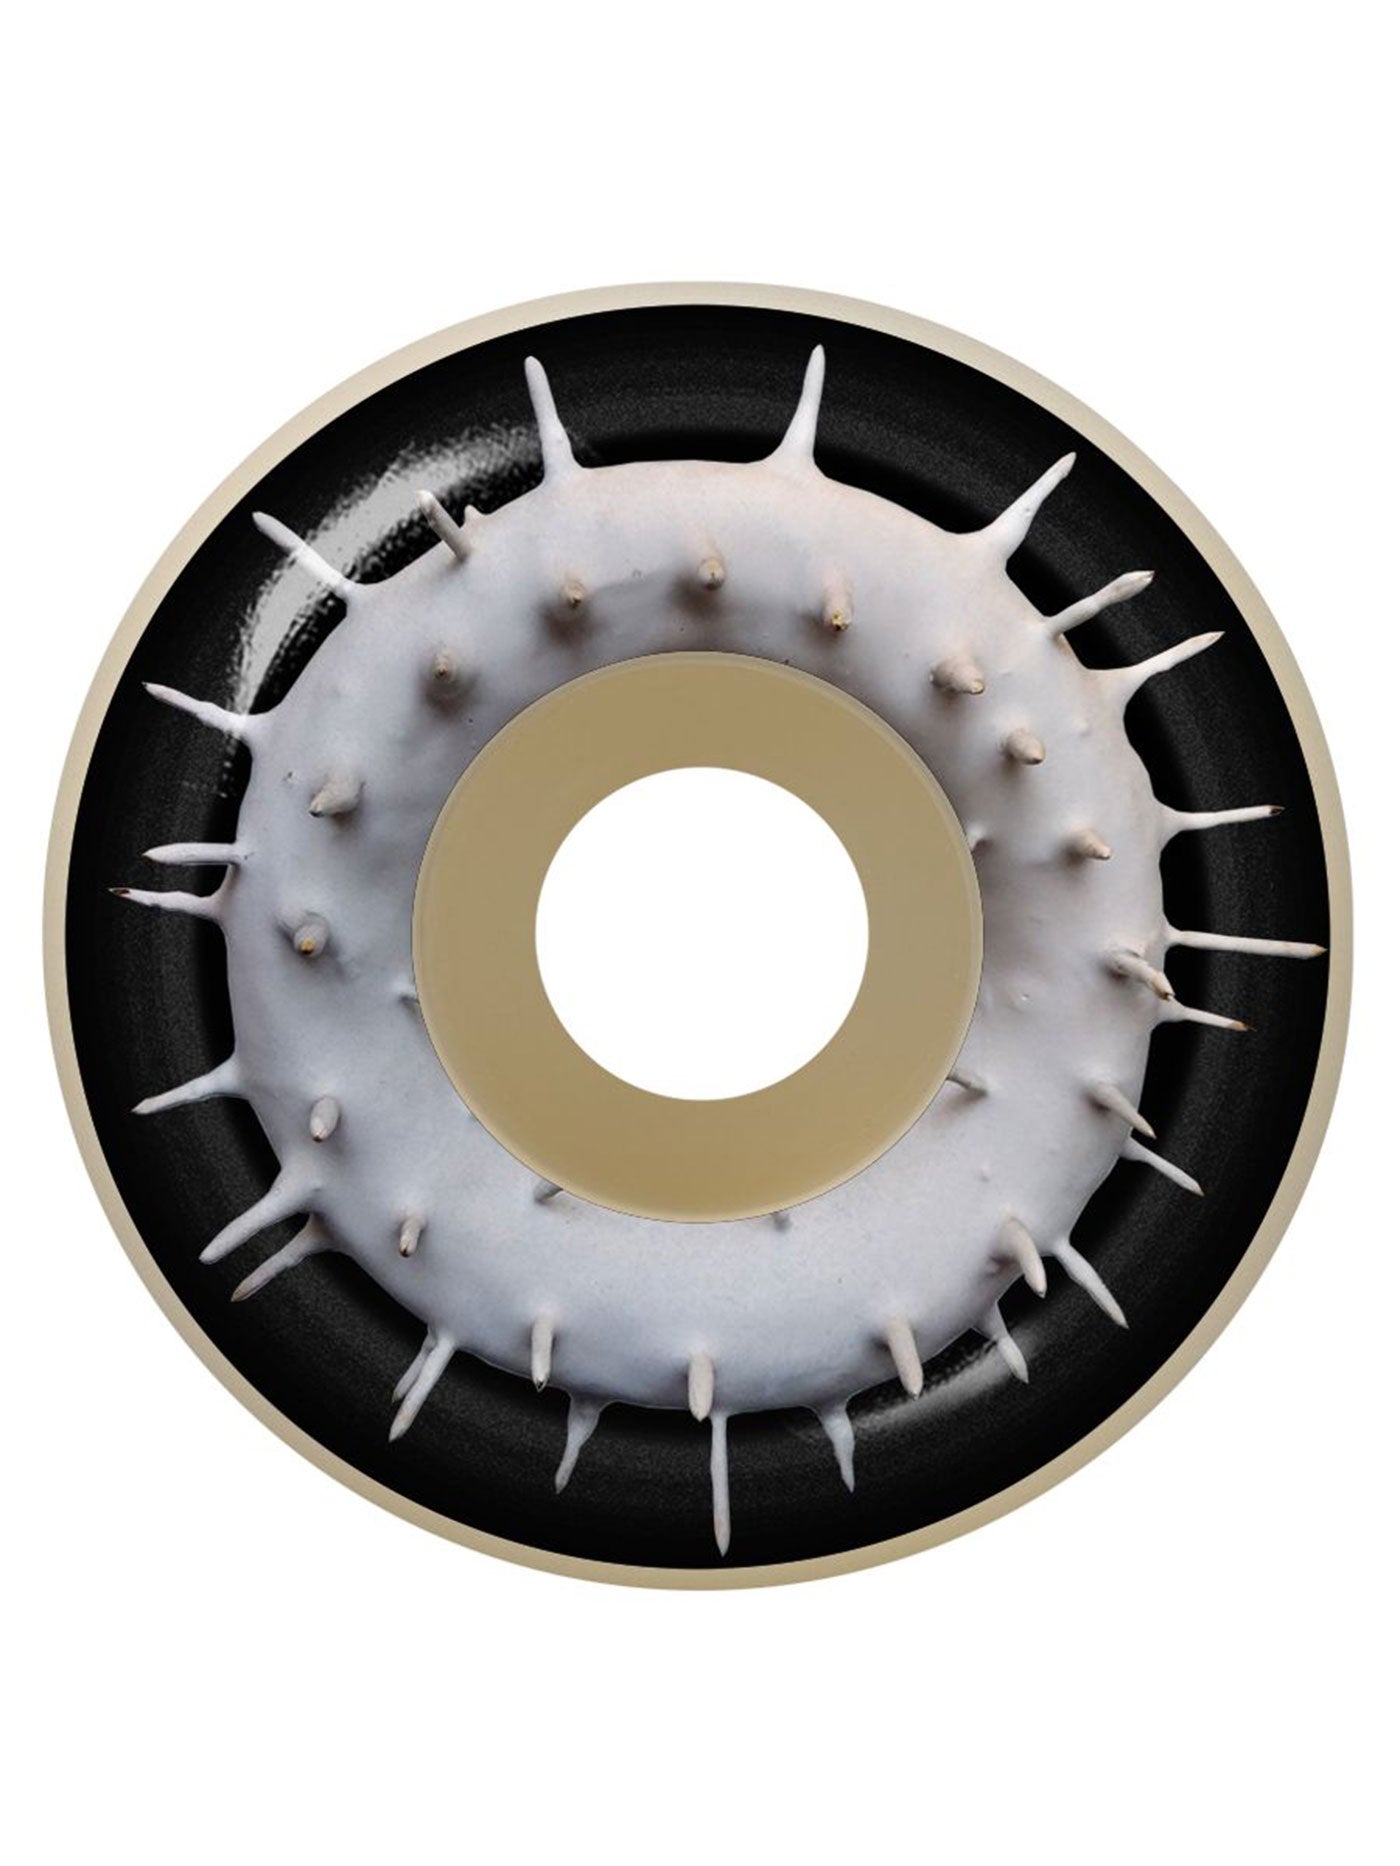 Spitfire F4 Max Palmer Spiked Conical Full Skateboard Wheels